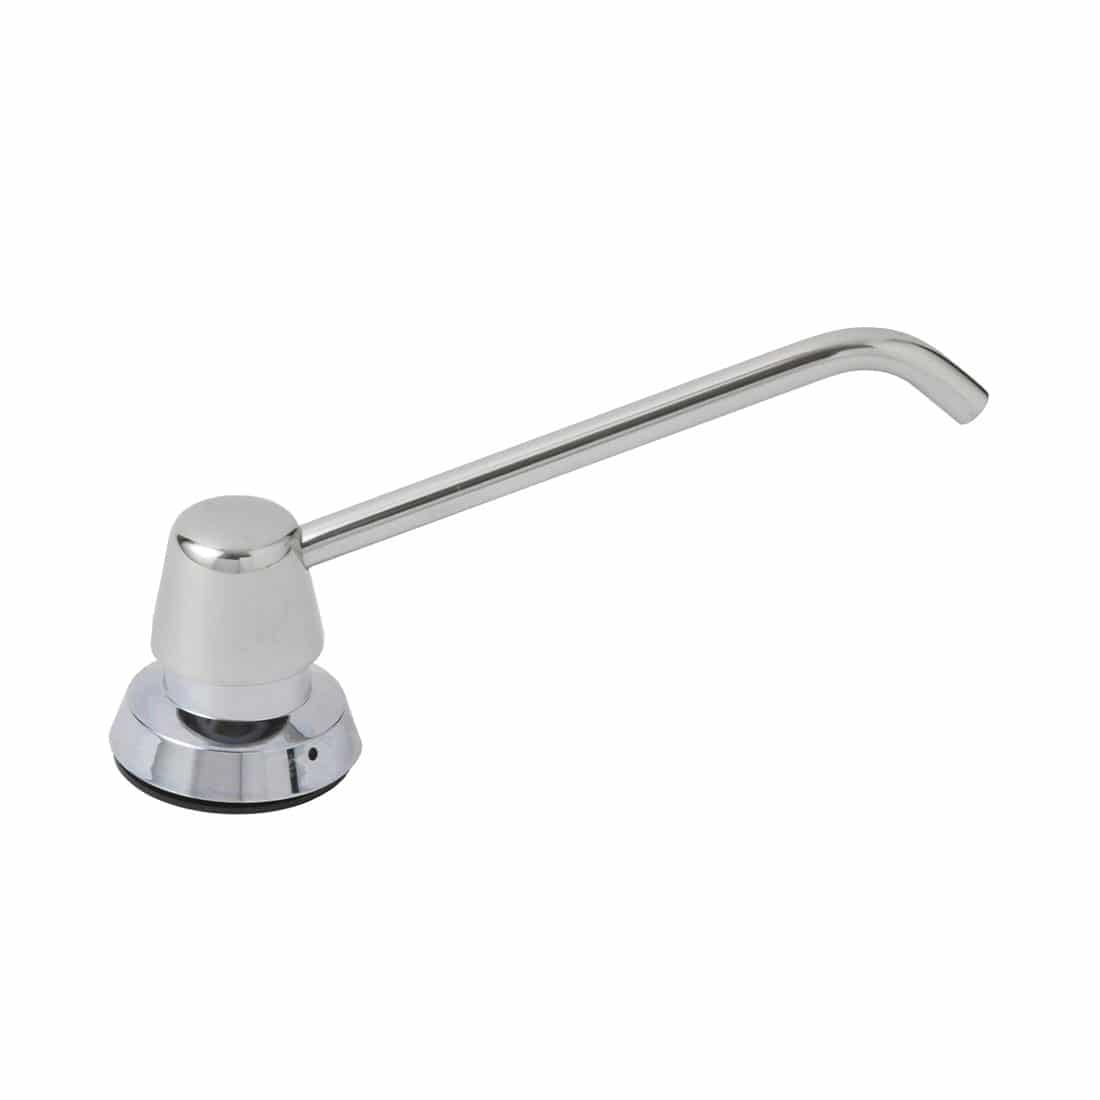 Extended bright polished spout of the Bobrick B-8226 soap dispenser. 